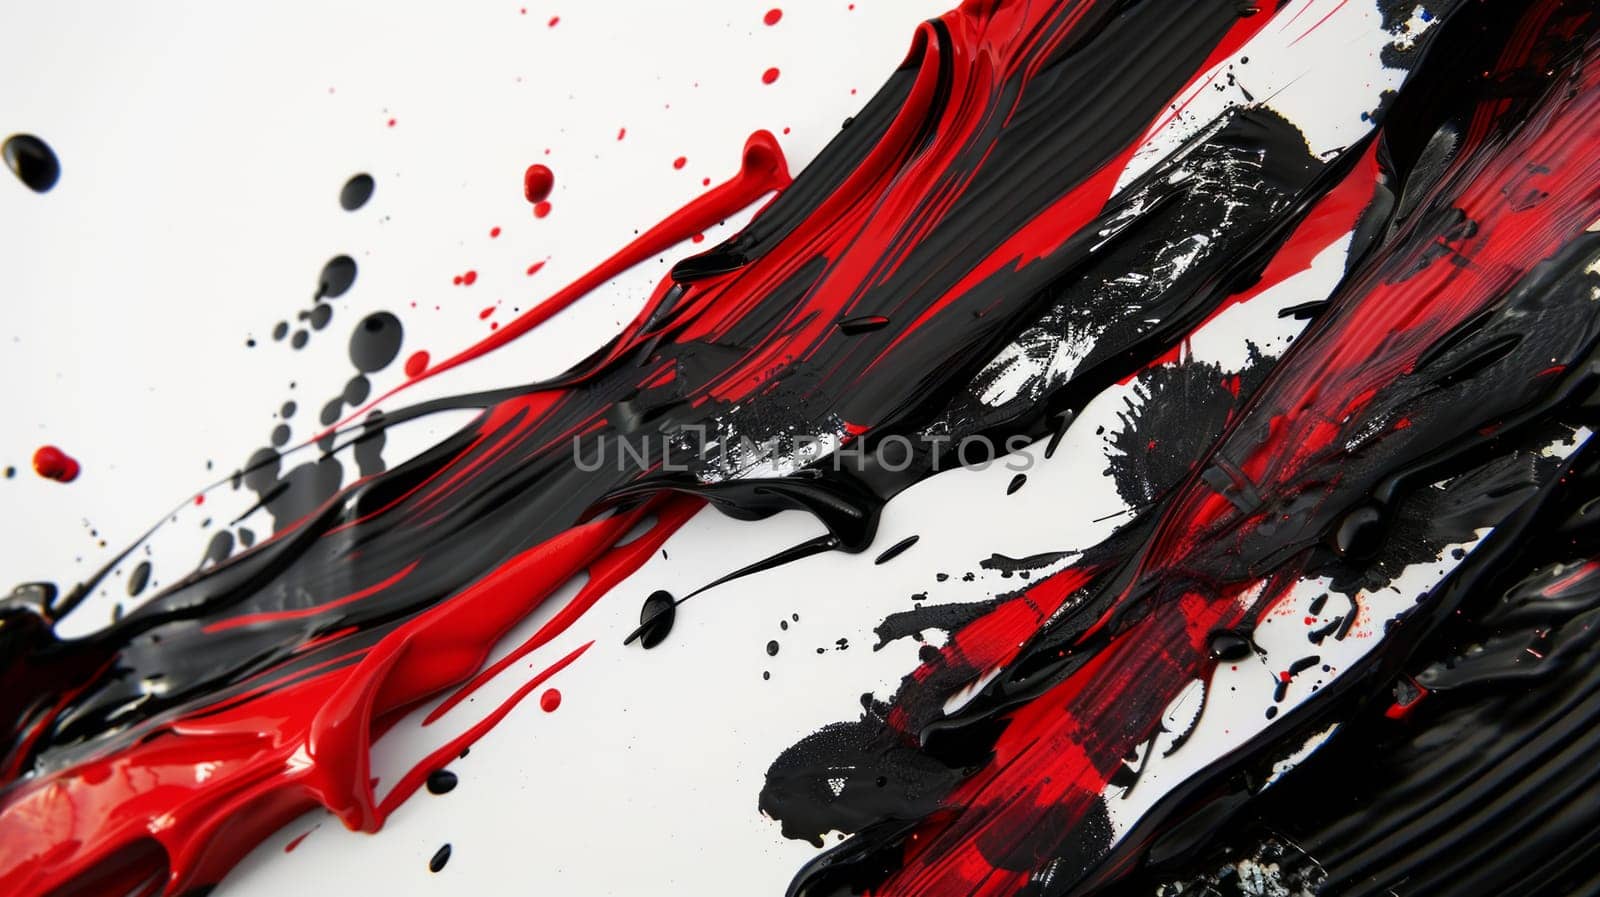 Vivid red and ebony black paint dance across a pristine white canvas in an artistically expressive explosion by but_photo